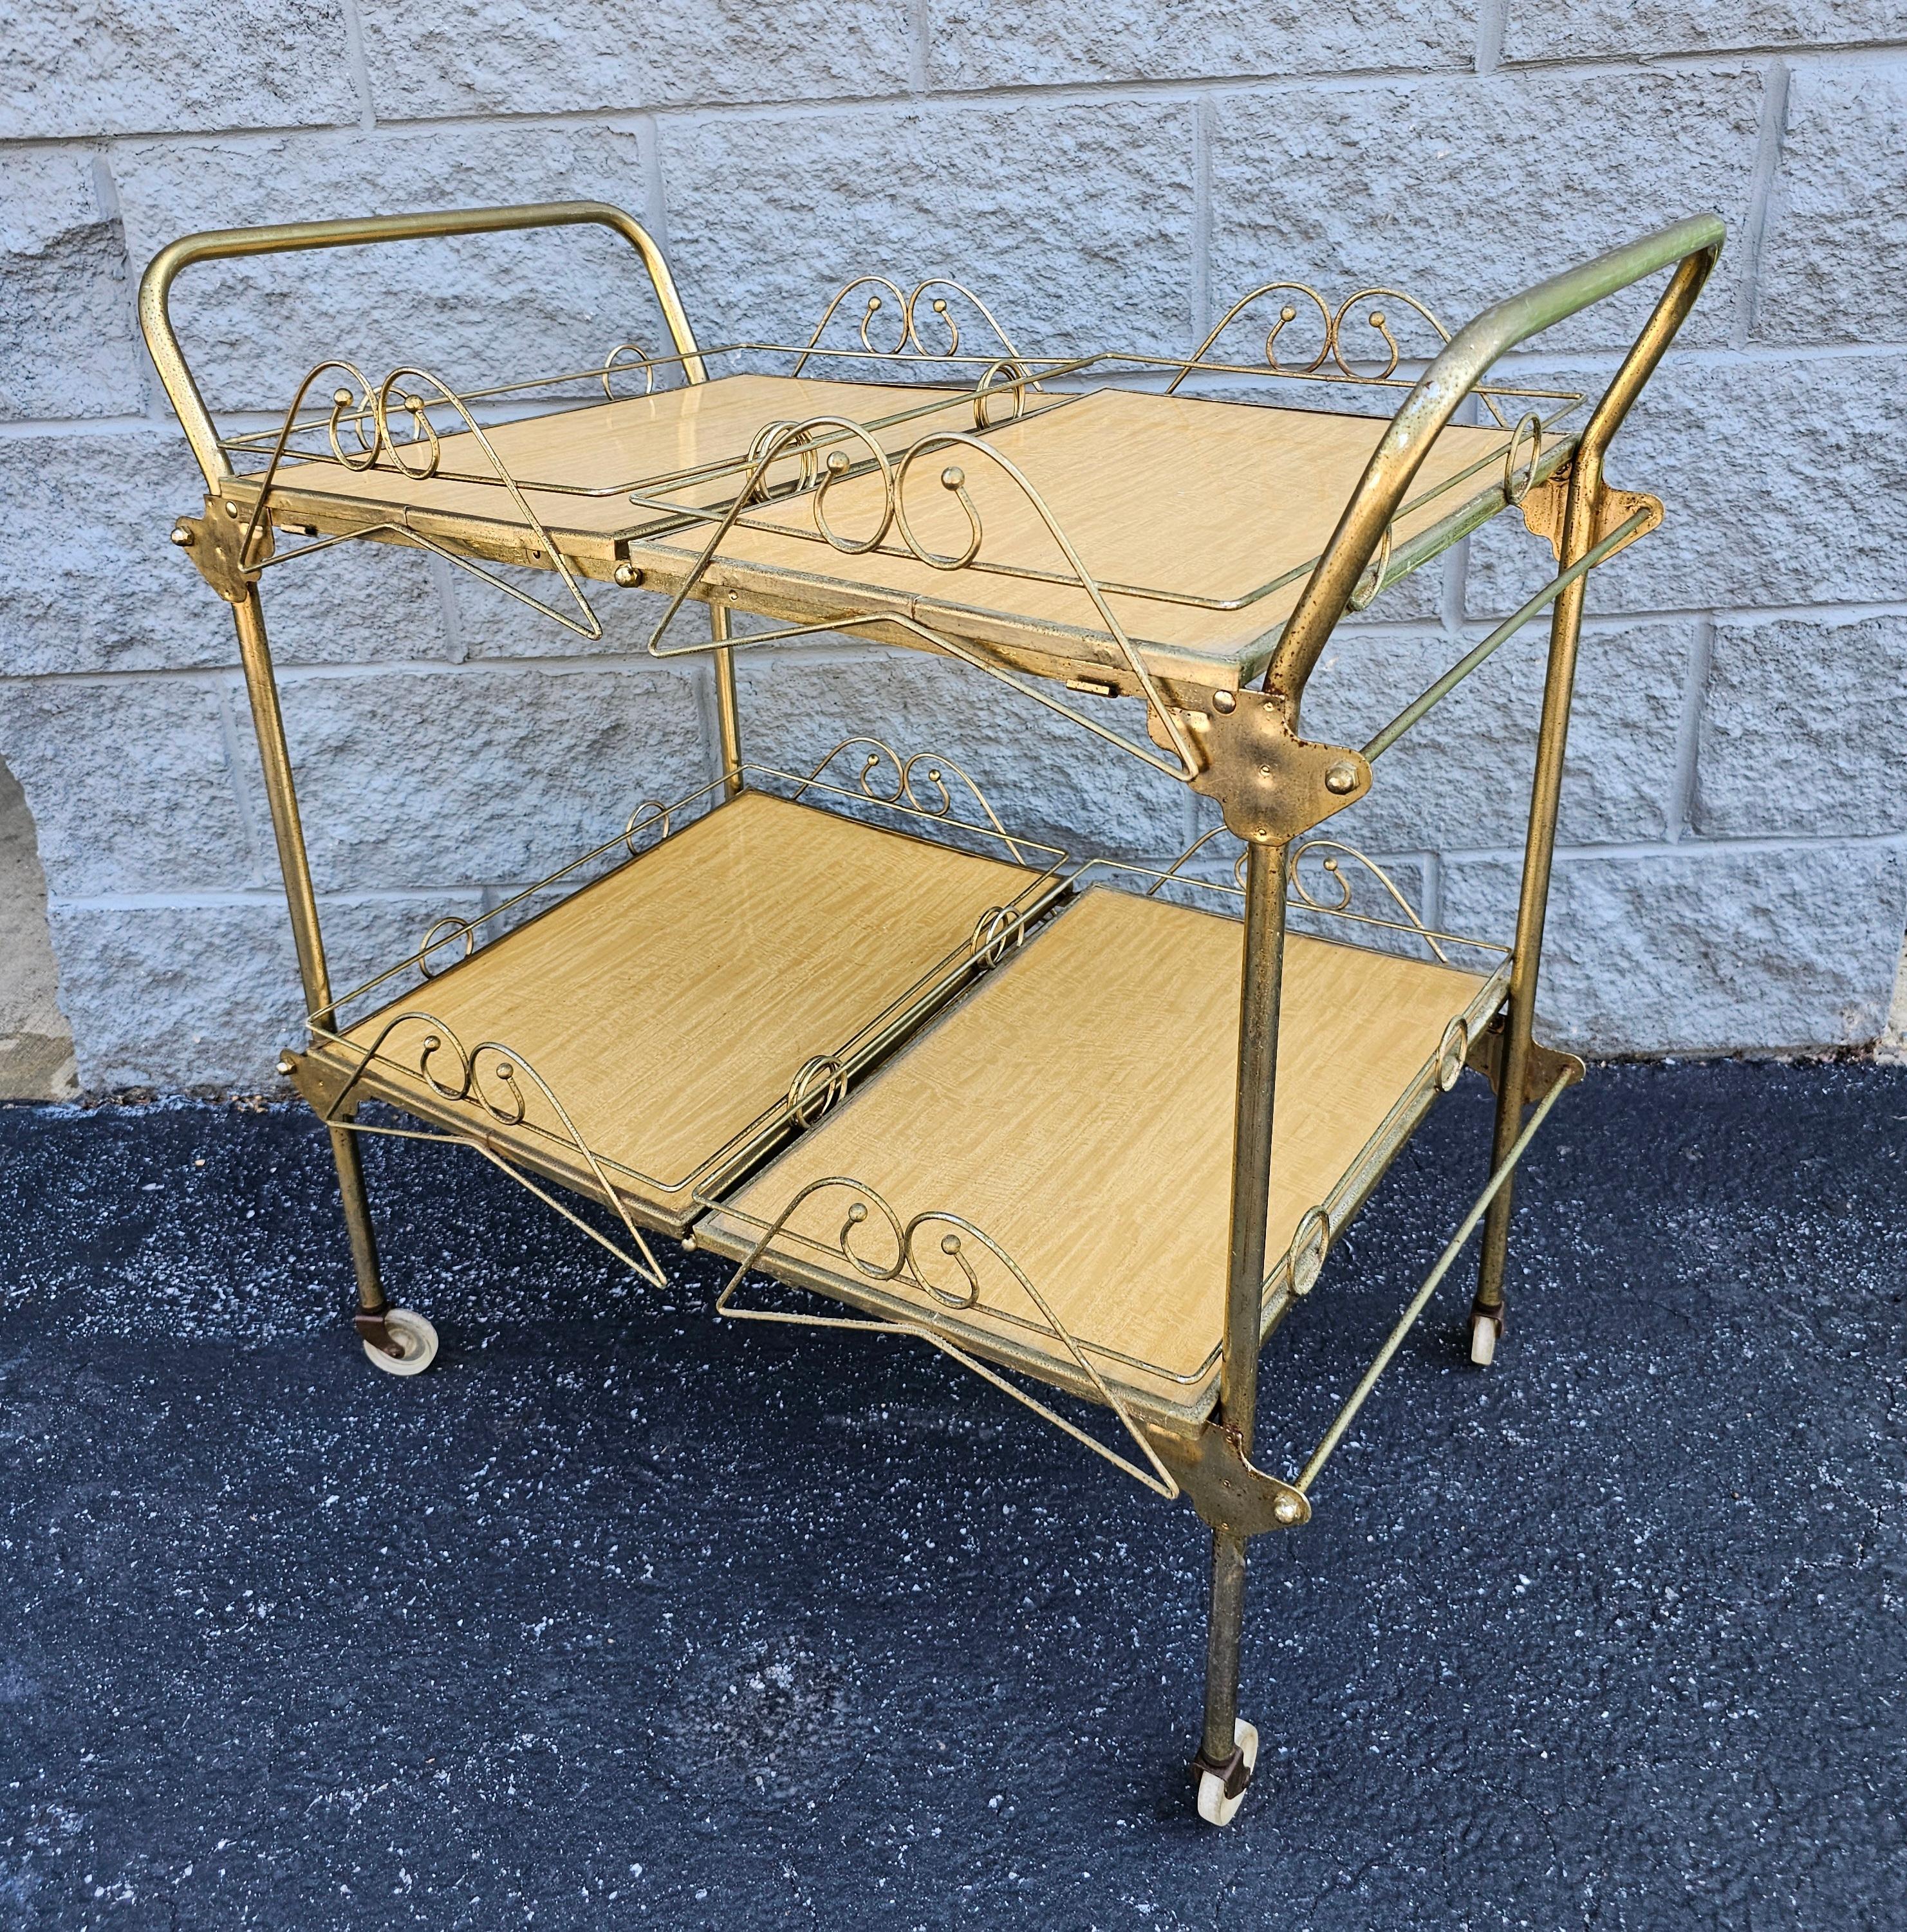 A rare 1960s Vintage Metal Brass Tone  Rolling and Folding 4-Tray Bar attributed to Cesare Lacca. Remove all 4 trays, fold and store while not in use. Measures 30